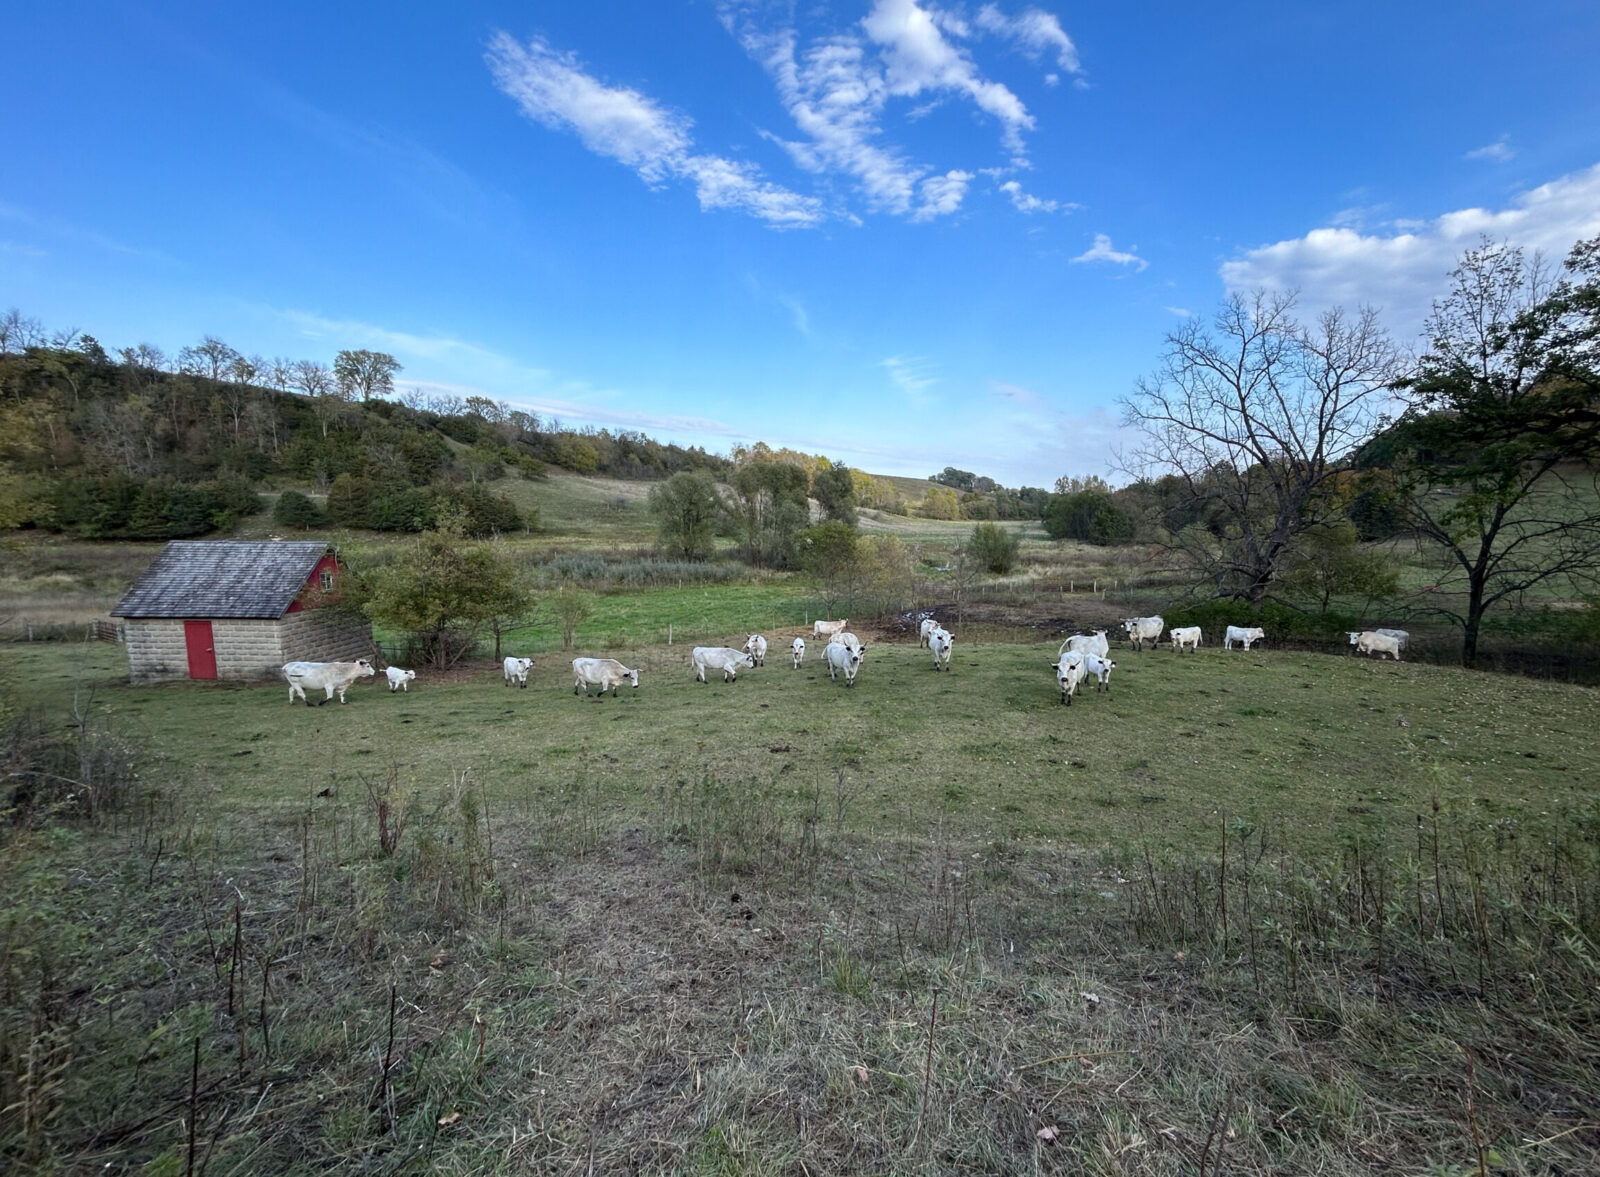 Several white cows graze a field next to a small red building